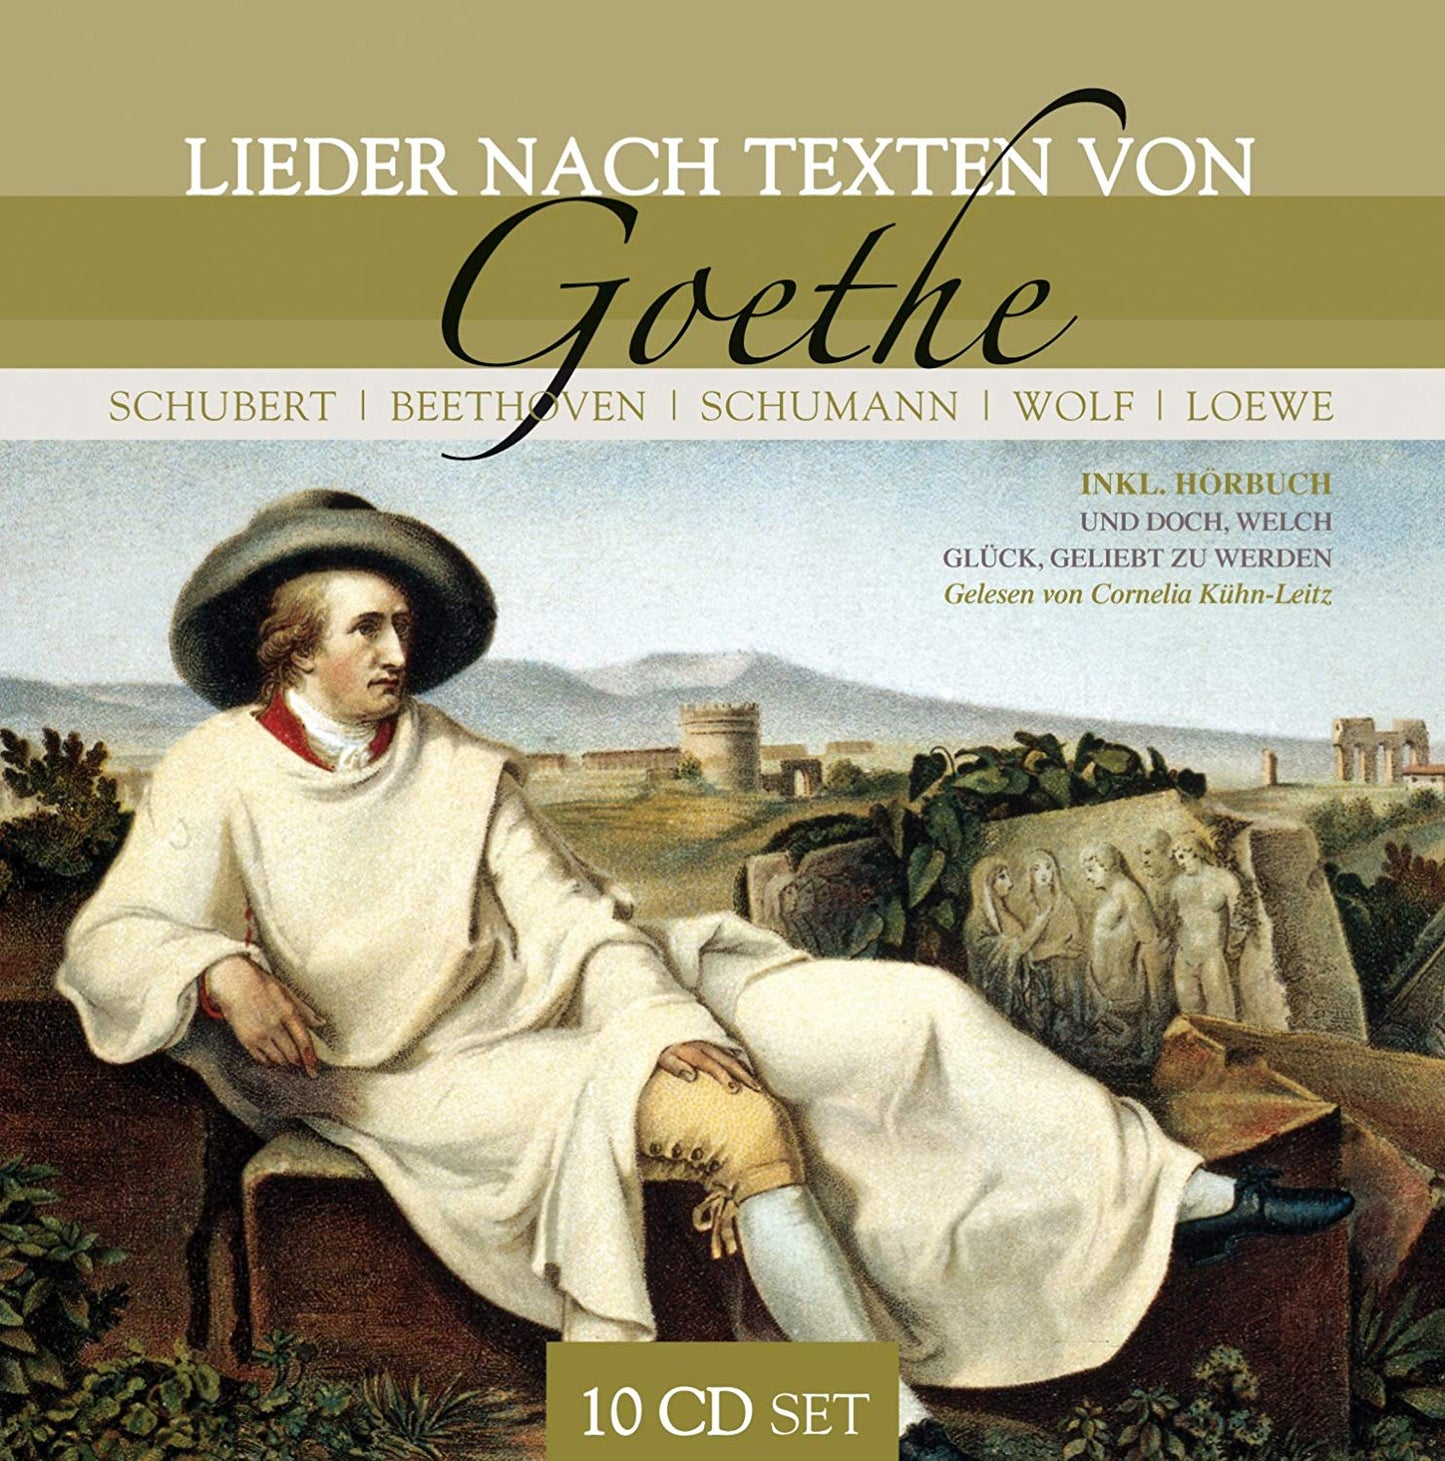 SONGS FROM TEXTS BY GOETHE - BEETHOVEN, SCHUBERT, SCHUMANN, WOLF, LOEWE  (10 CDS)